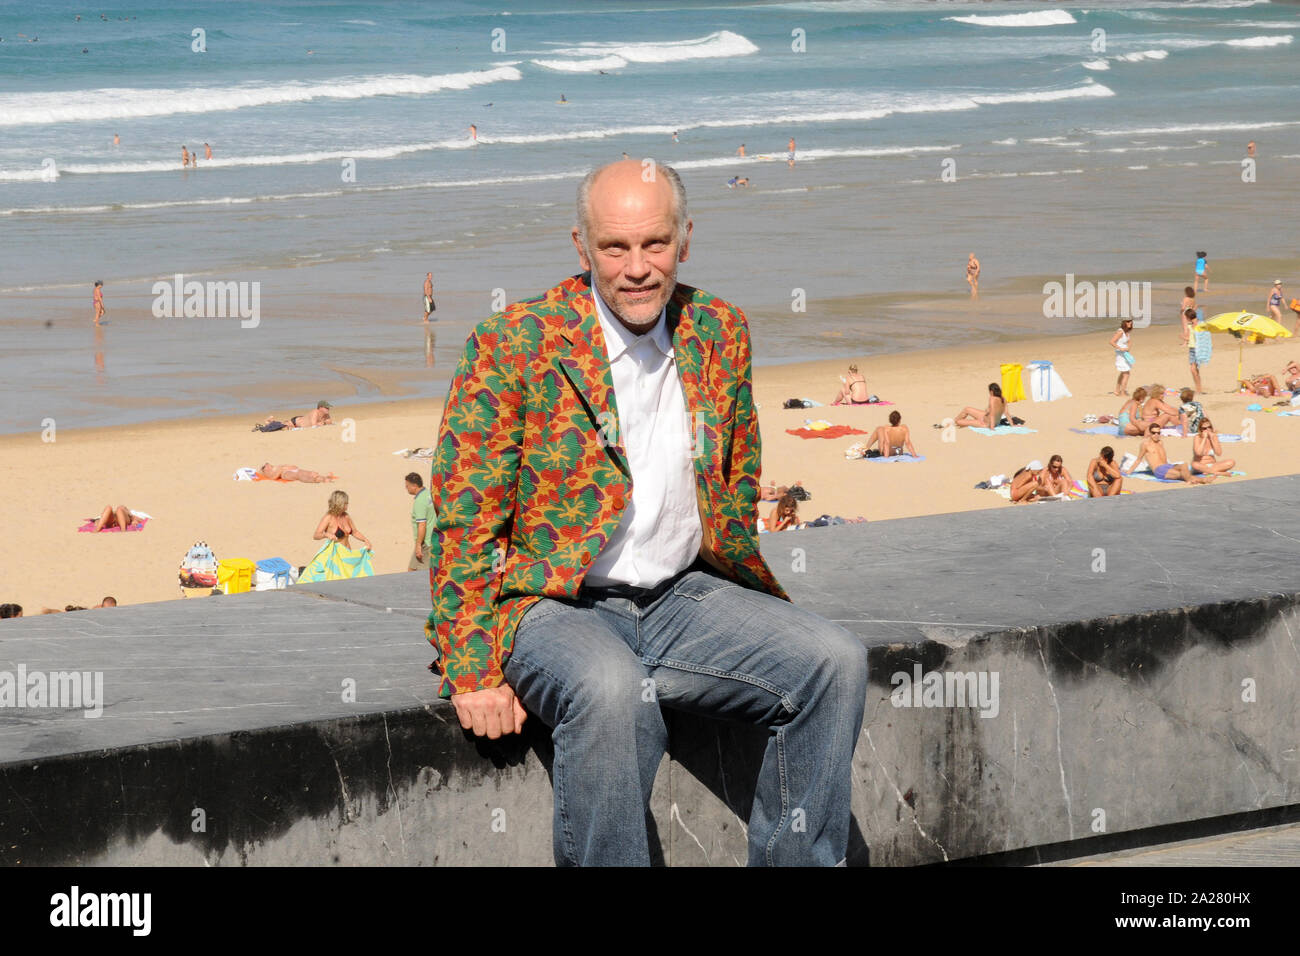 John Malkovich attends photocall for the film 'Burn after reading' (Credit Image: © Julen Pascual Gonzalez) Stock Photo